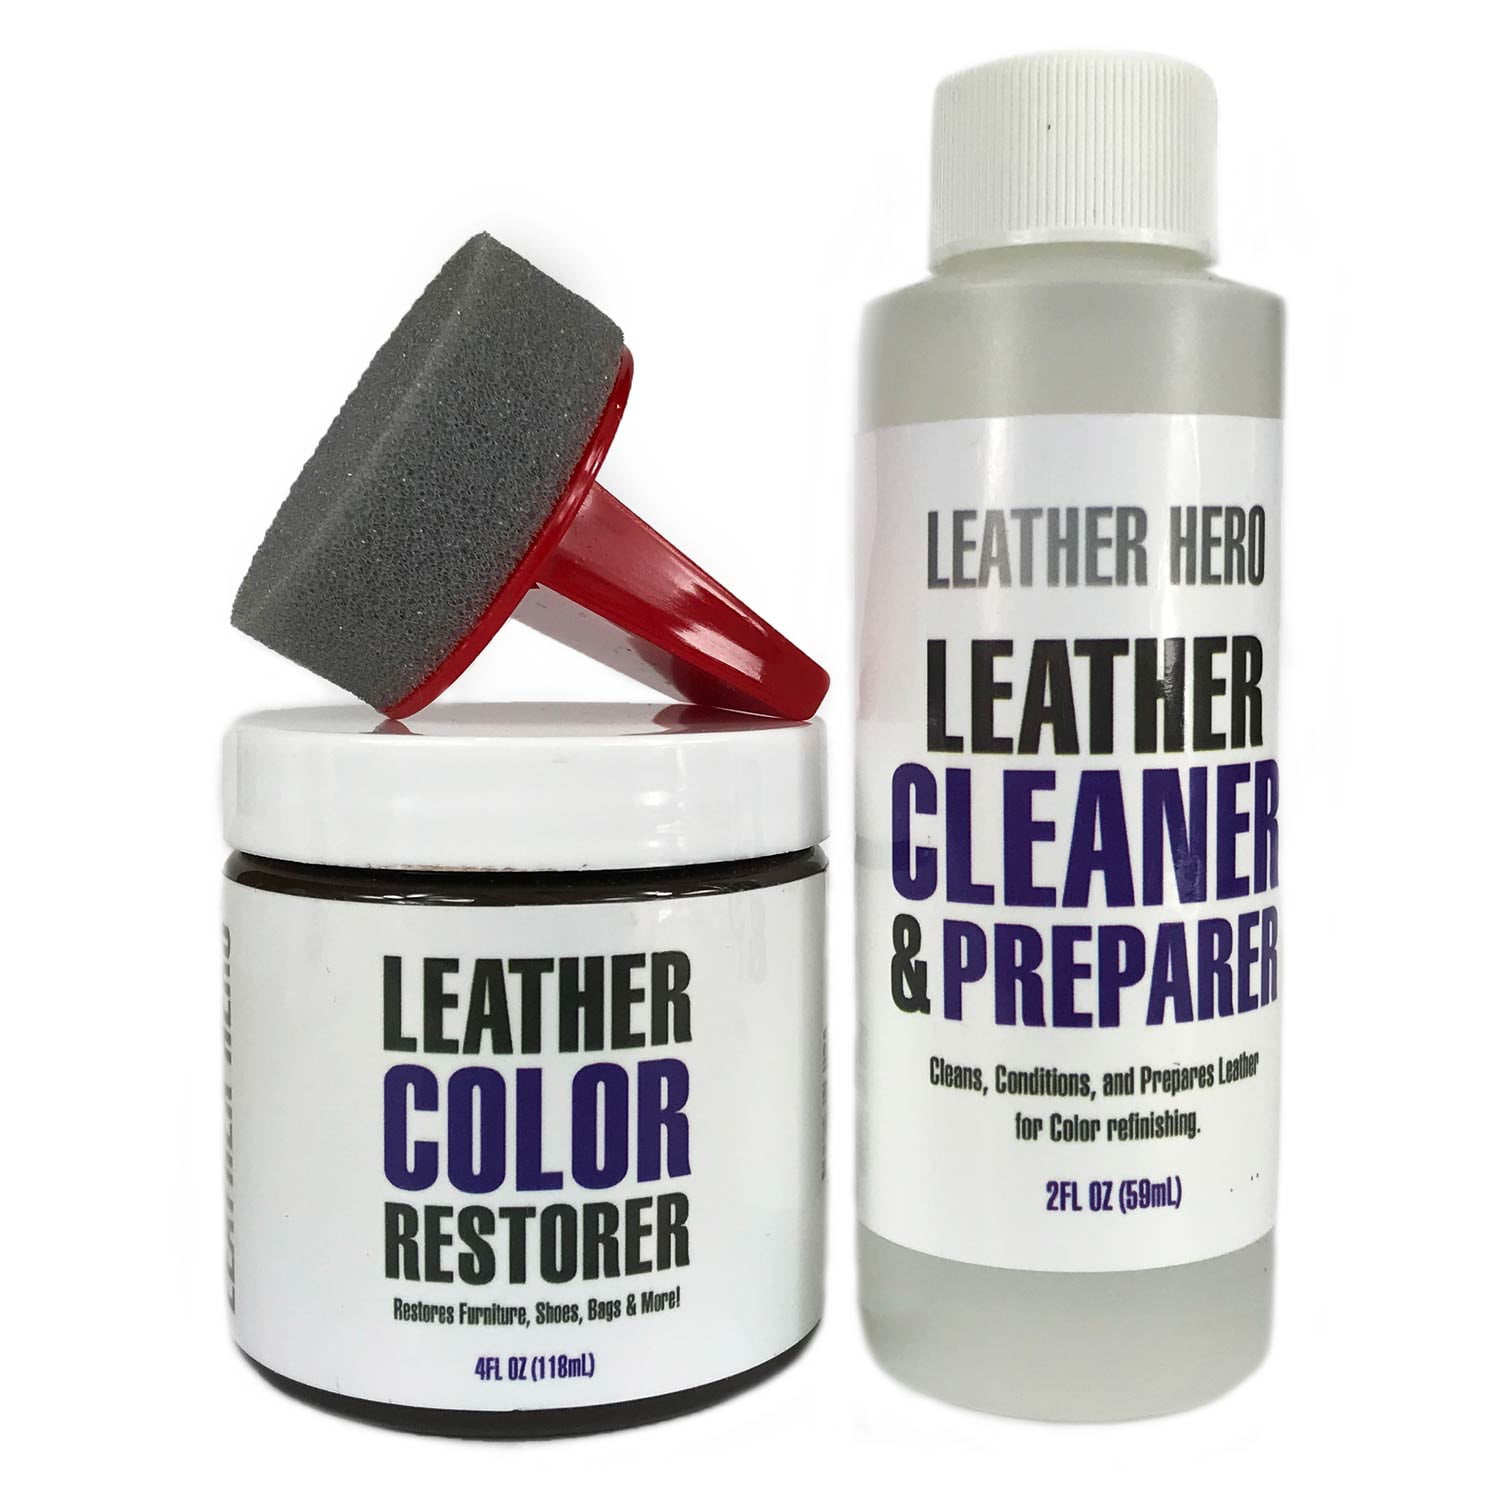 Leather Repair And Restoration Color, How To Recolor Leather